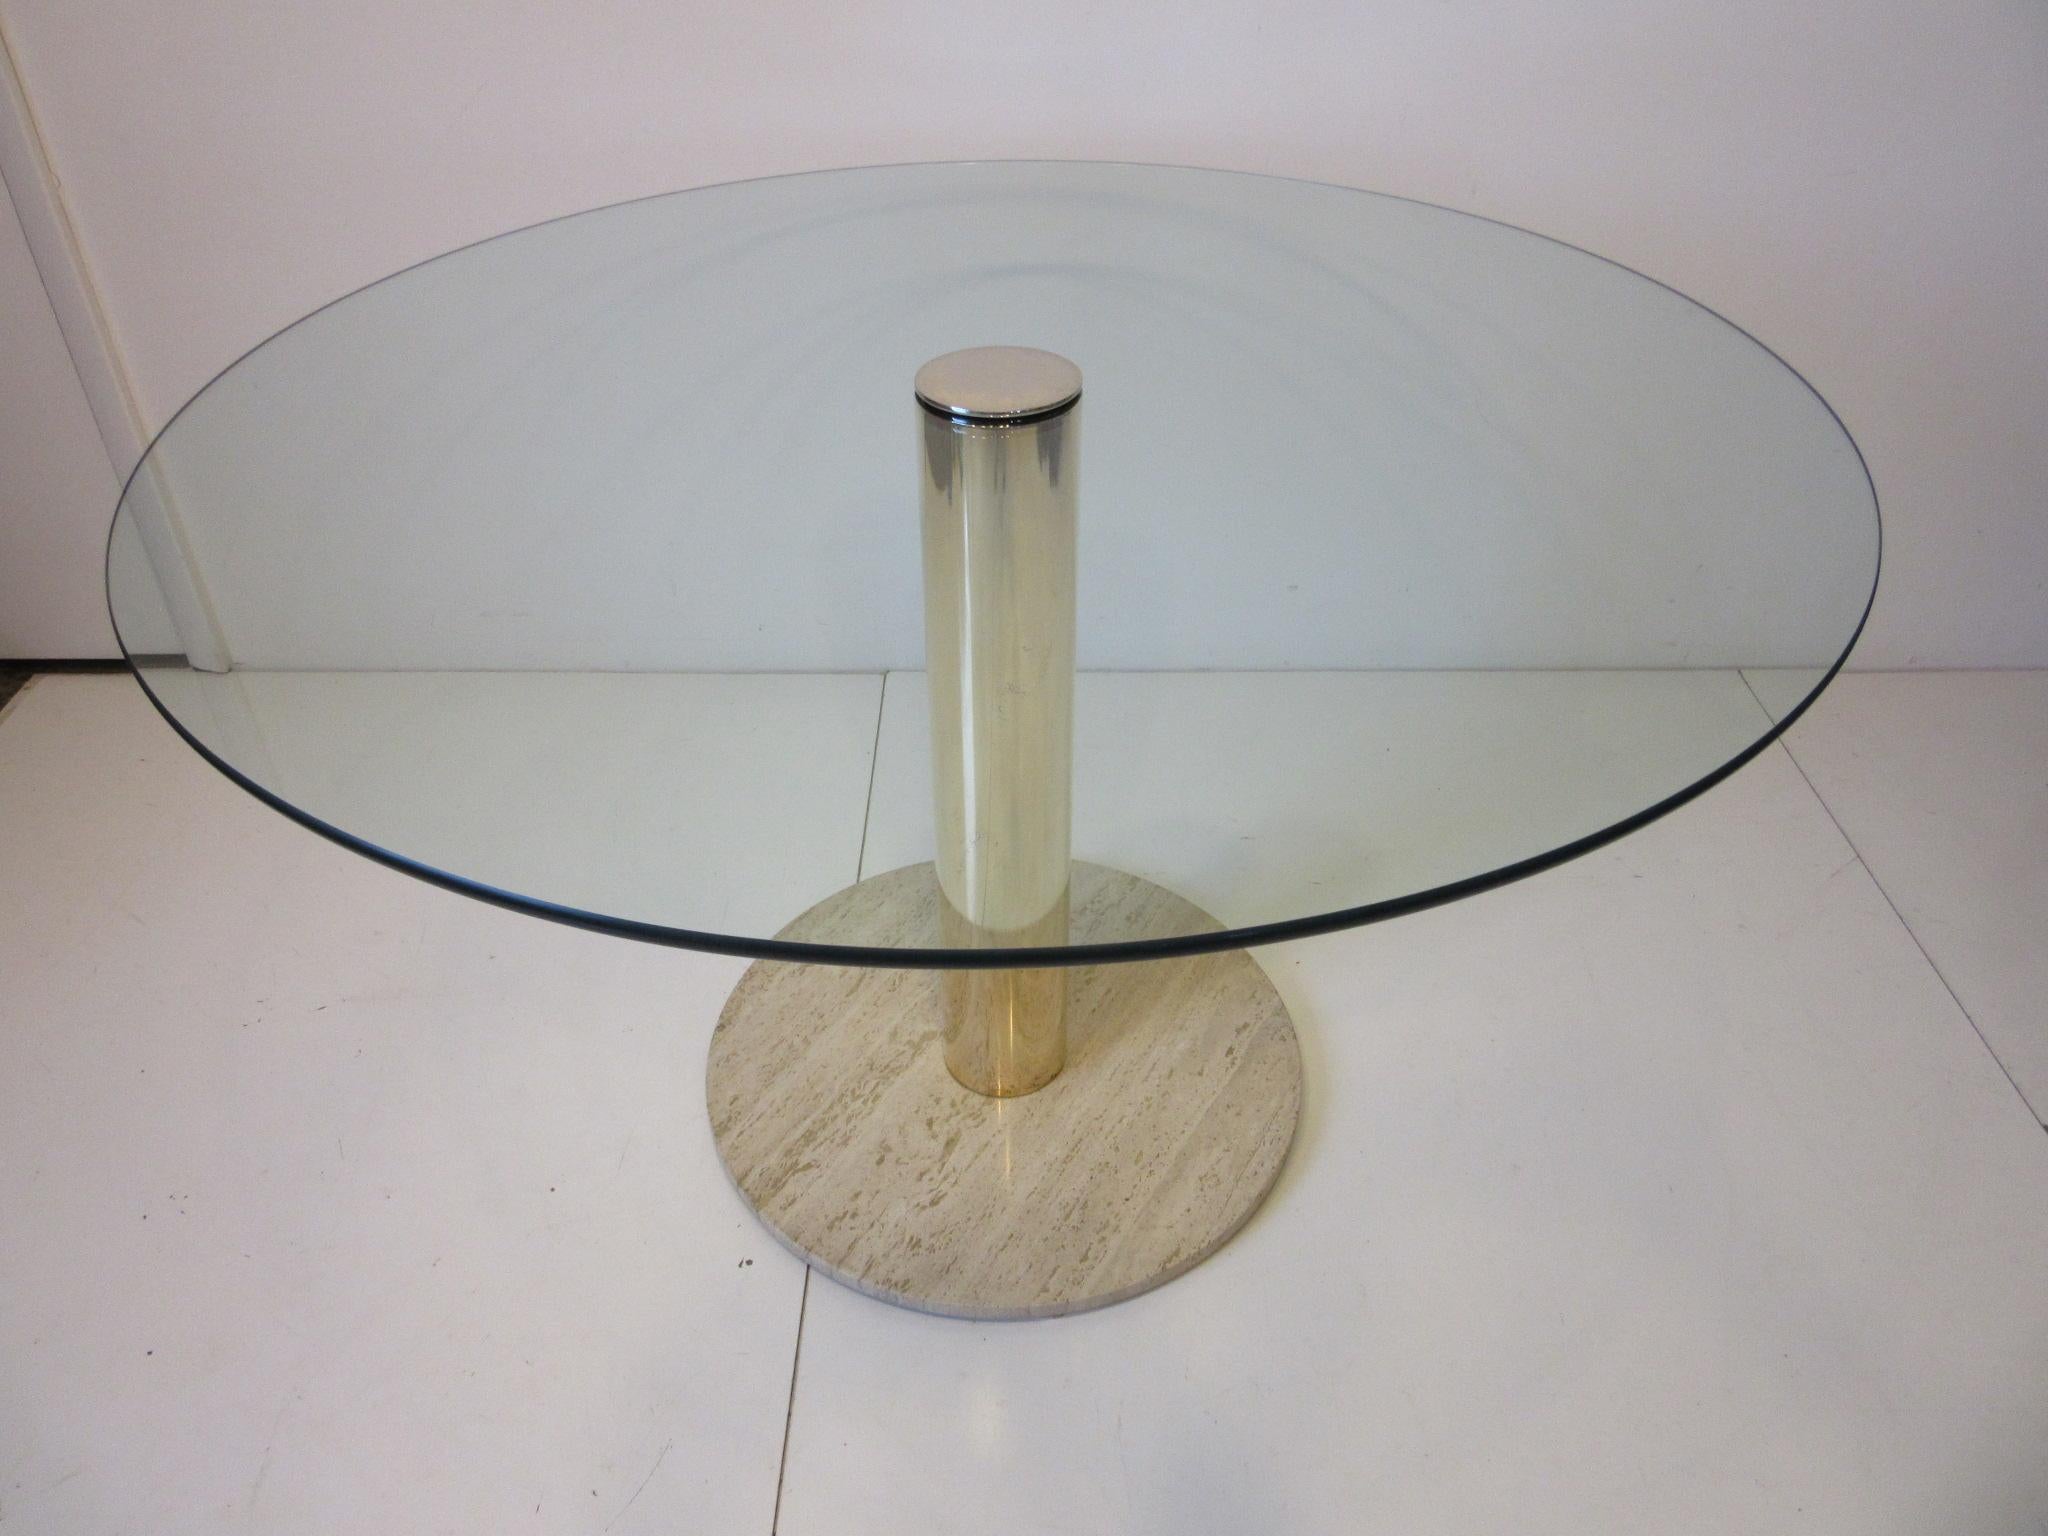 A round glass topped dining table with brass and Italian marble base designed by Leon Pace and manufacture by the Pace Furniture company know for their high quality and a staple of the 1970s and 1980s high end interiors.